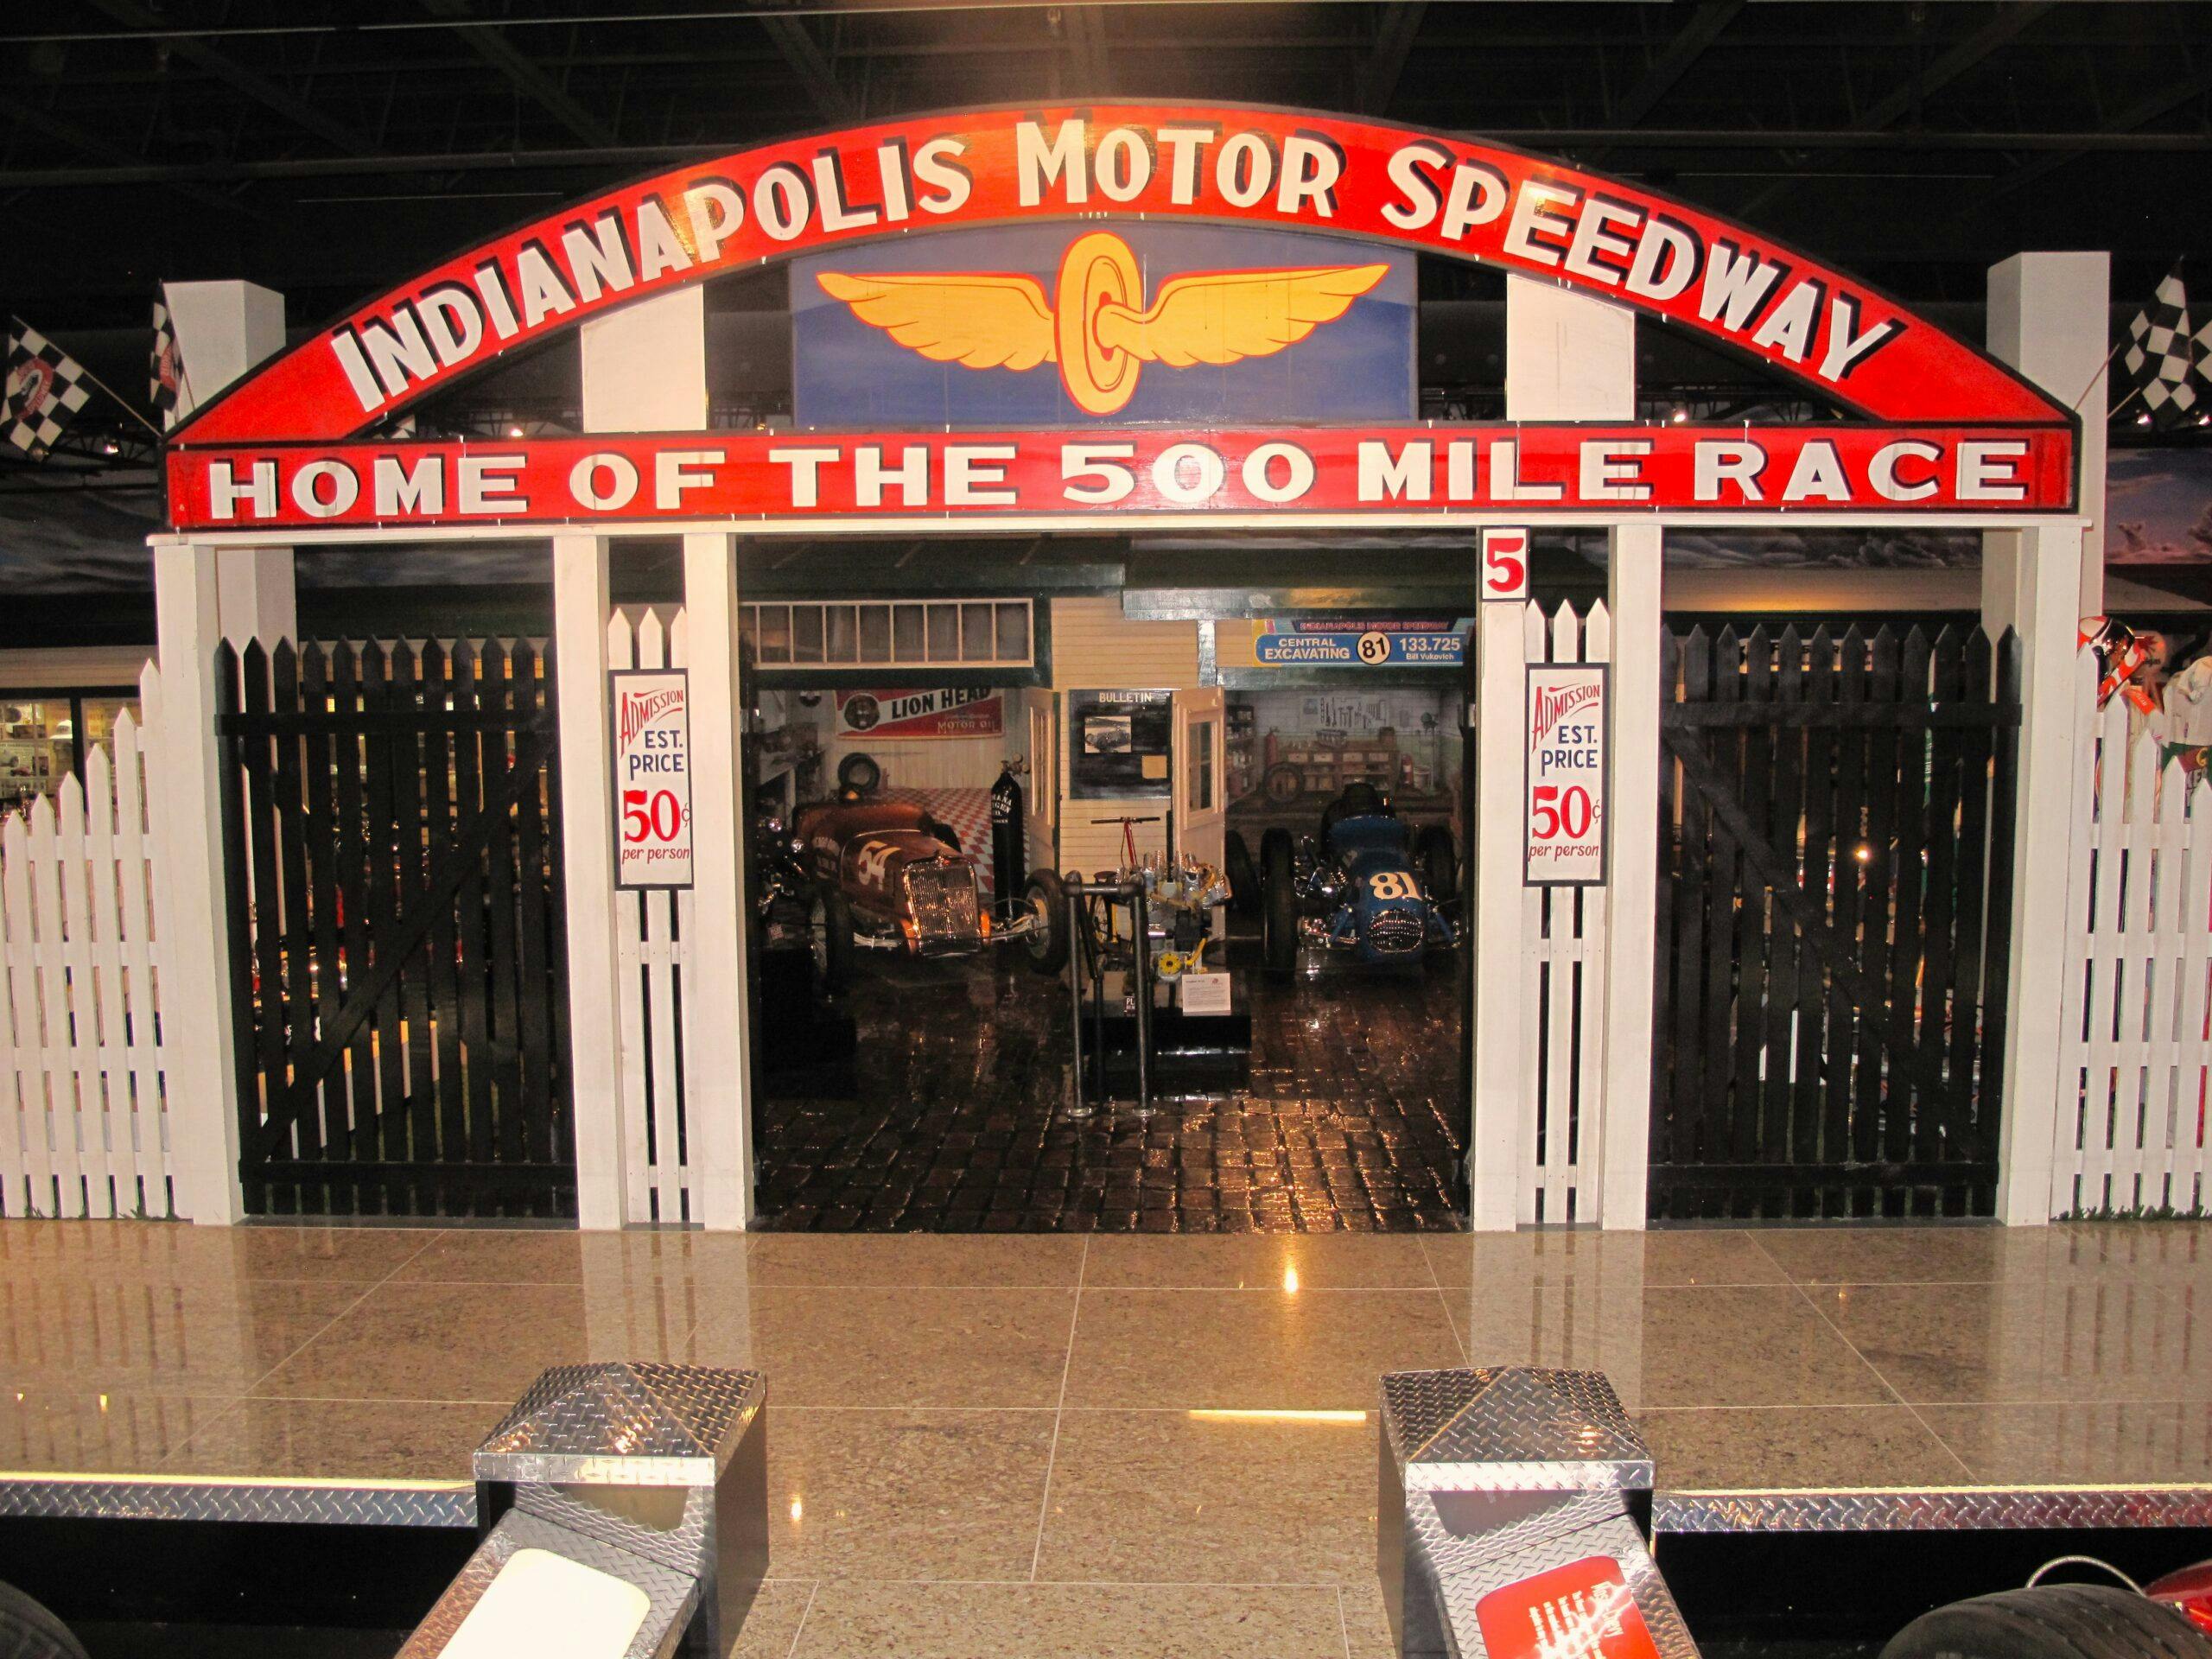 Museum of American Speed IMS entrance display